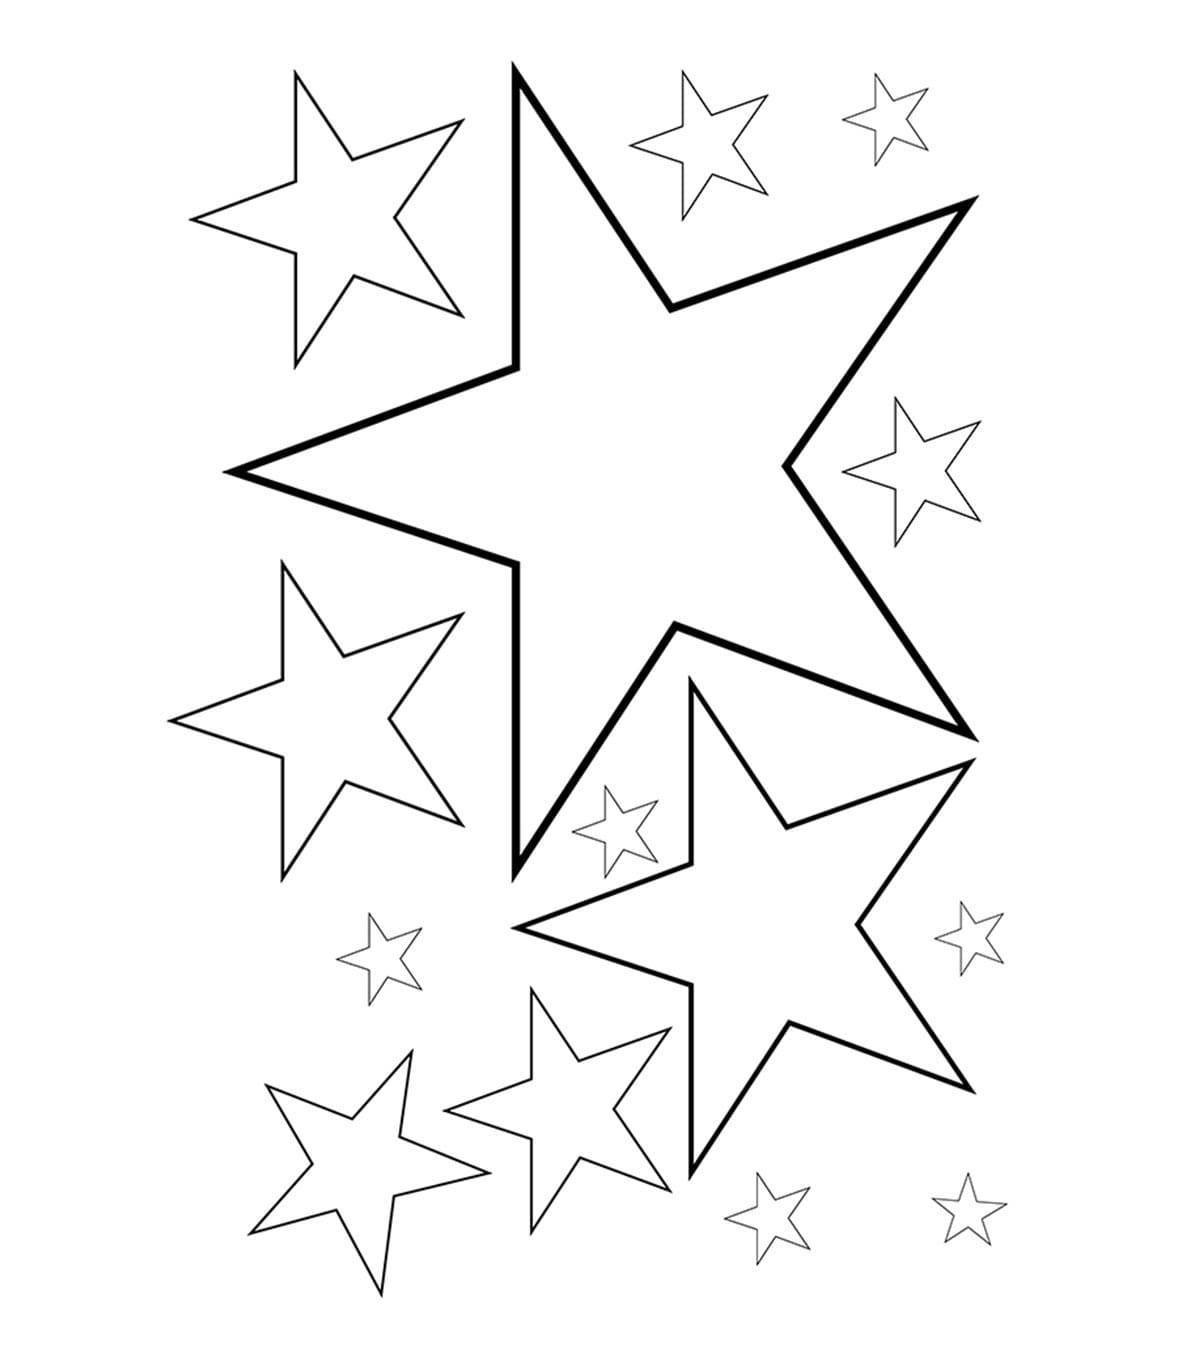 Jolly star coloring page